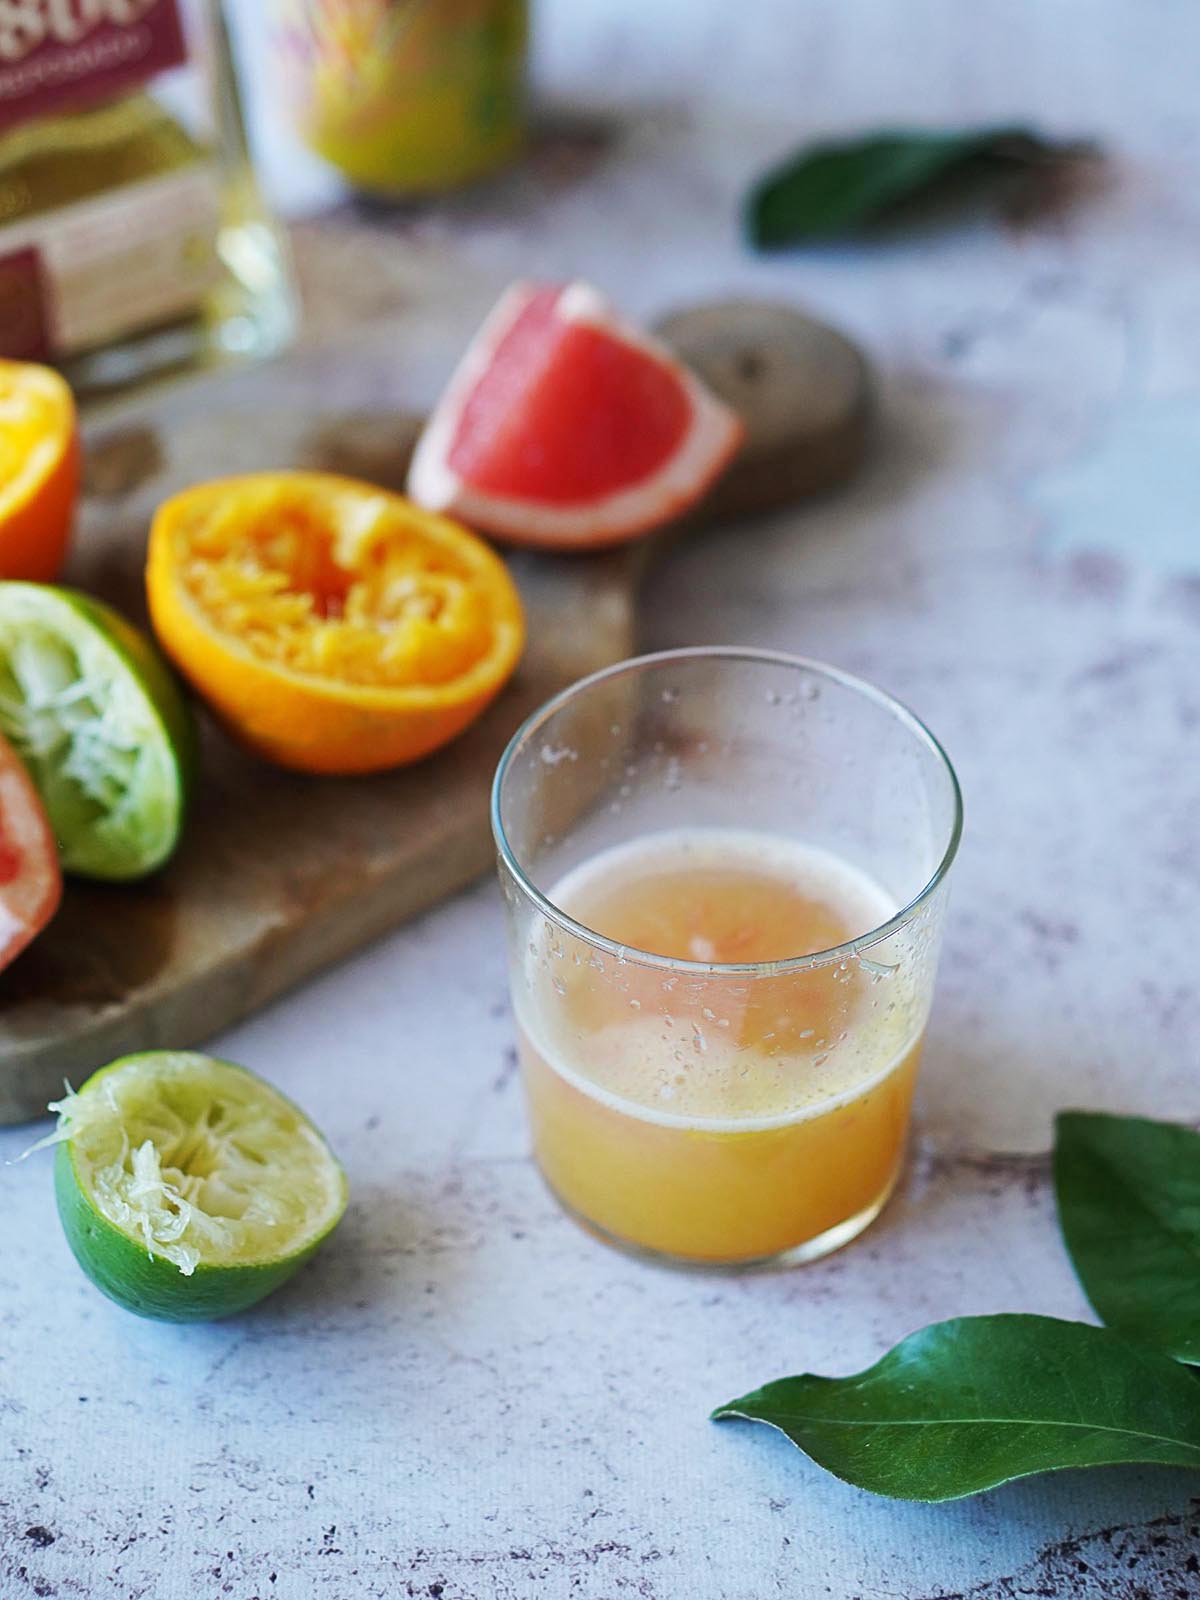 A glass with citrus juice plus squeezed oranges and grapefruits next to it.